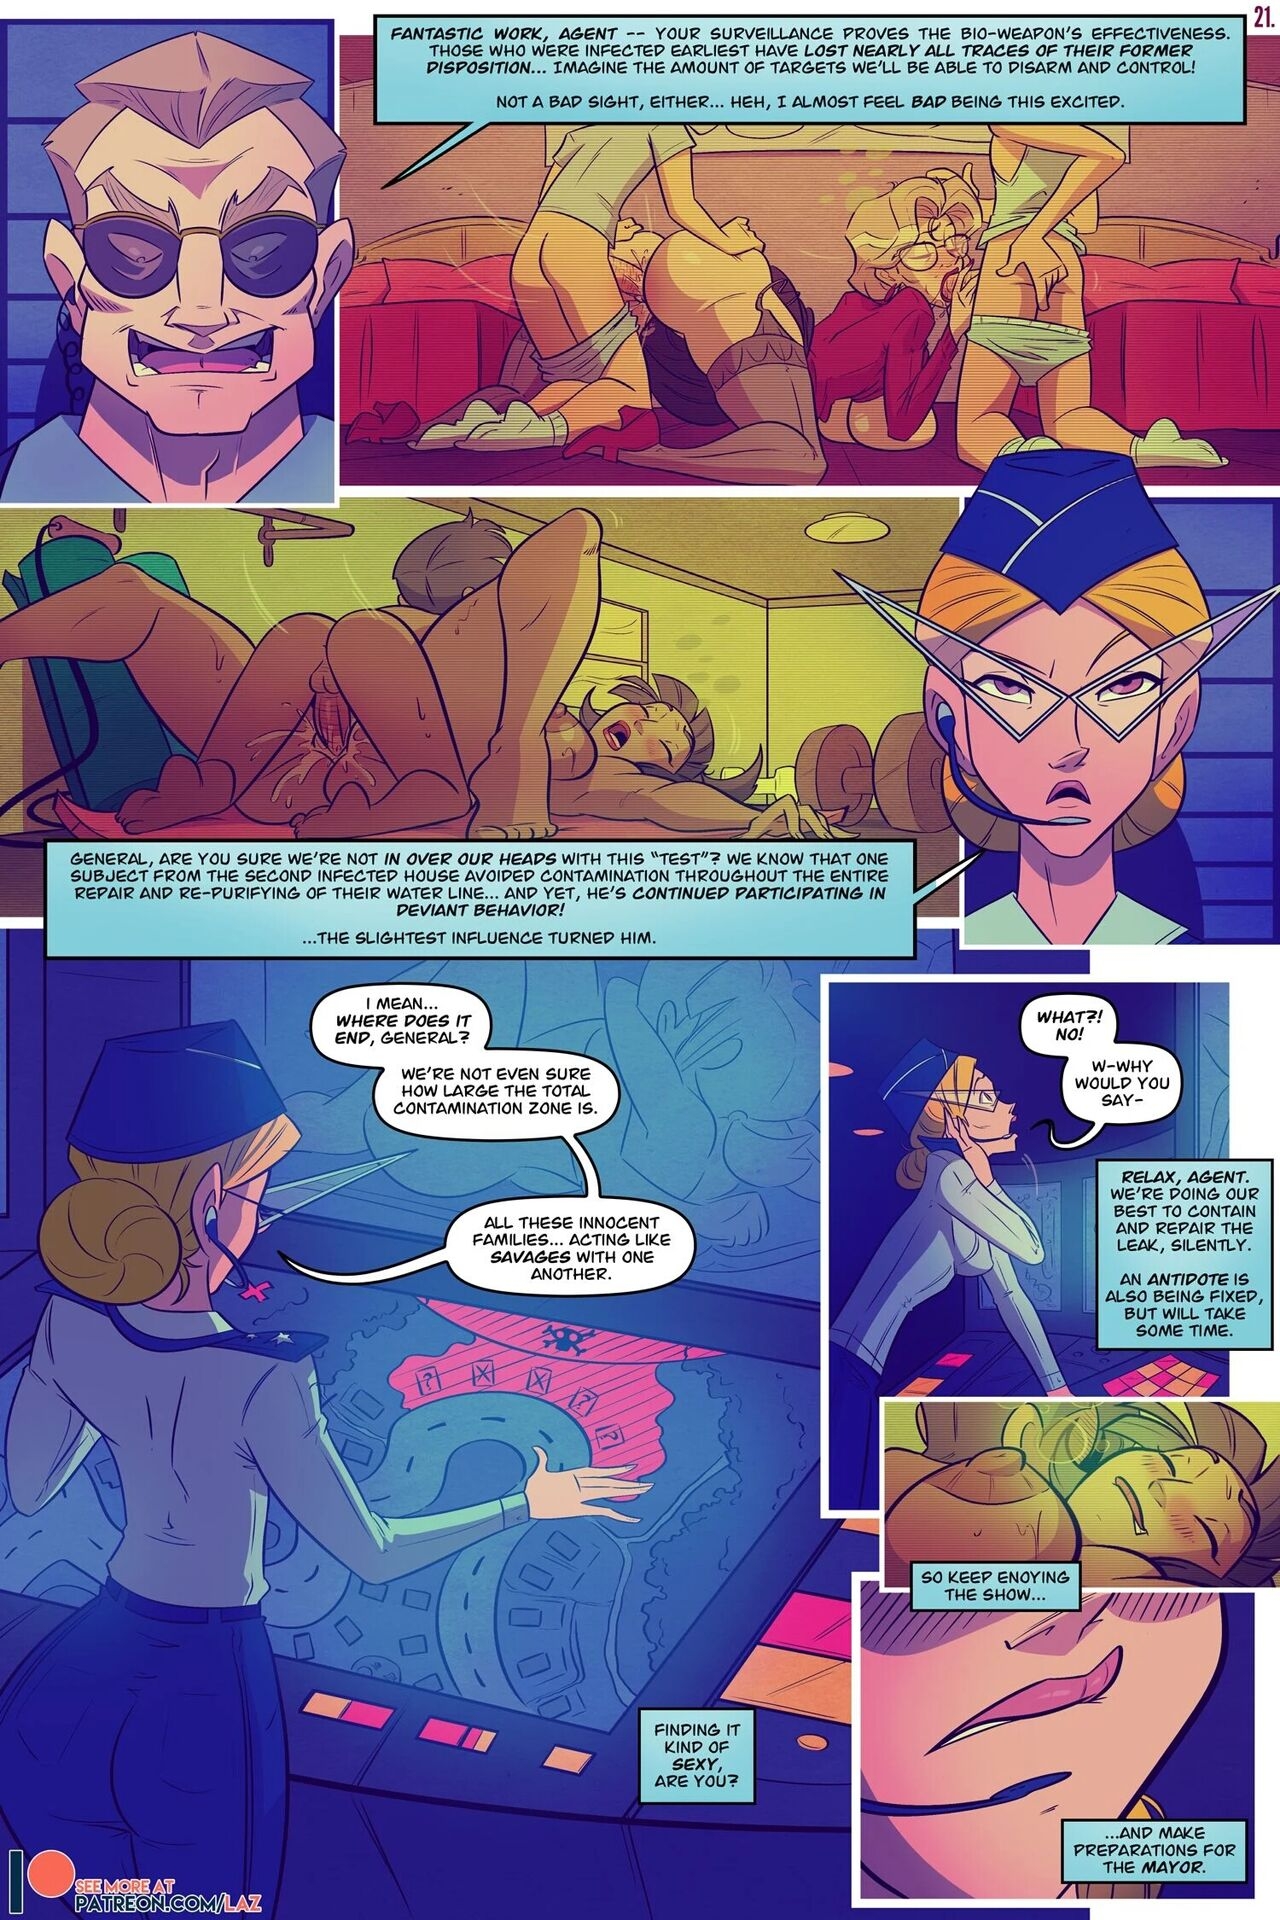 There Goes the Neighborhood - 02 - [Madefromlazers] - english 0